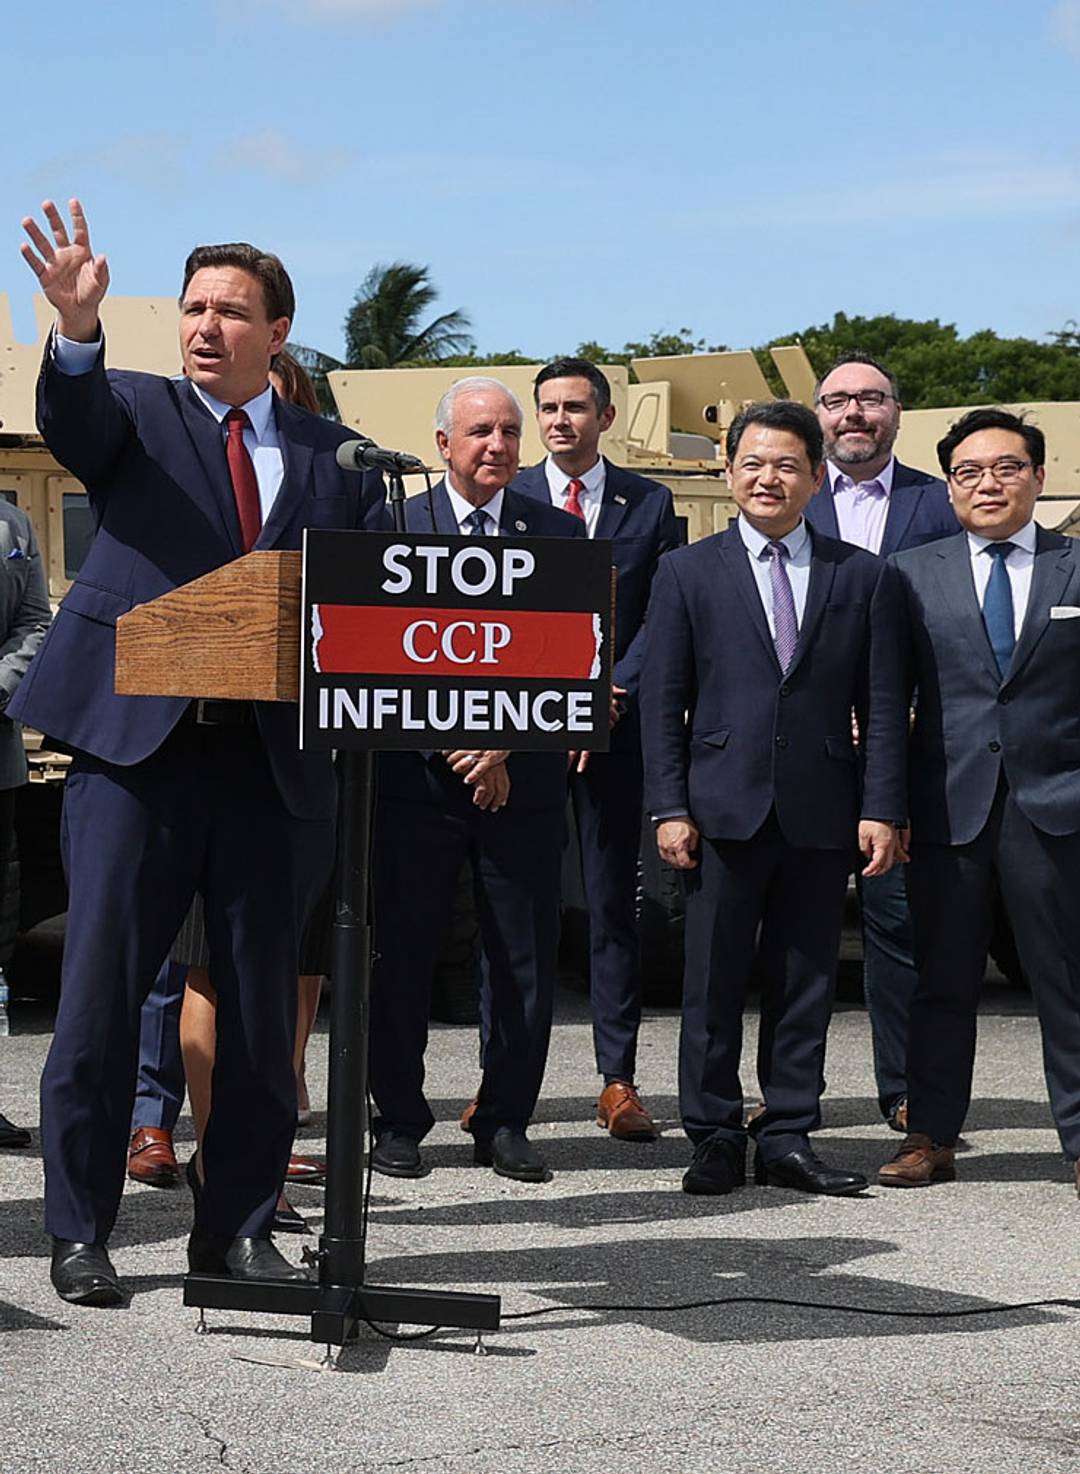 Florida Gov. Ron DeSantis signs two bills to combat foreign influence and corporate espionage, at the Florida National Guard Robert A. Ballard Armory, on June 7, 2021